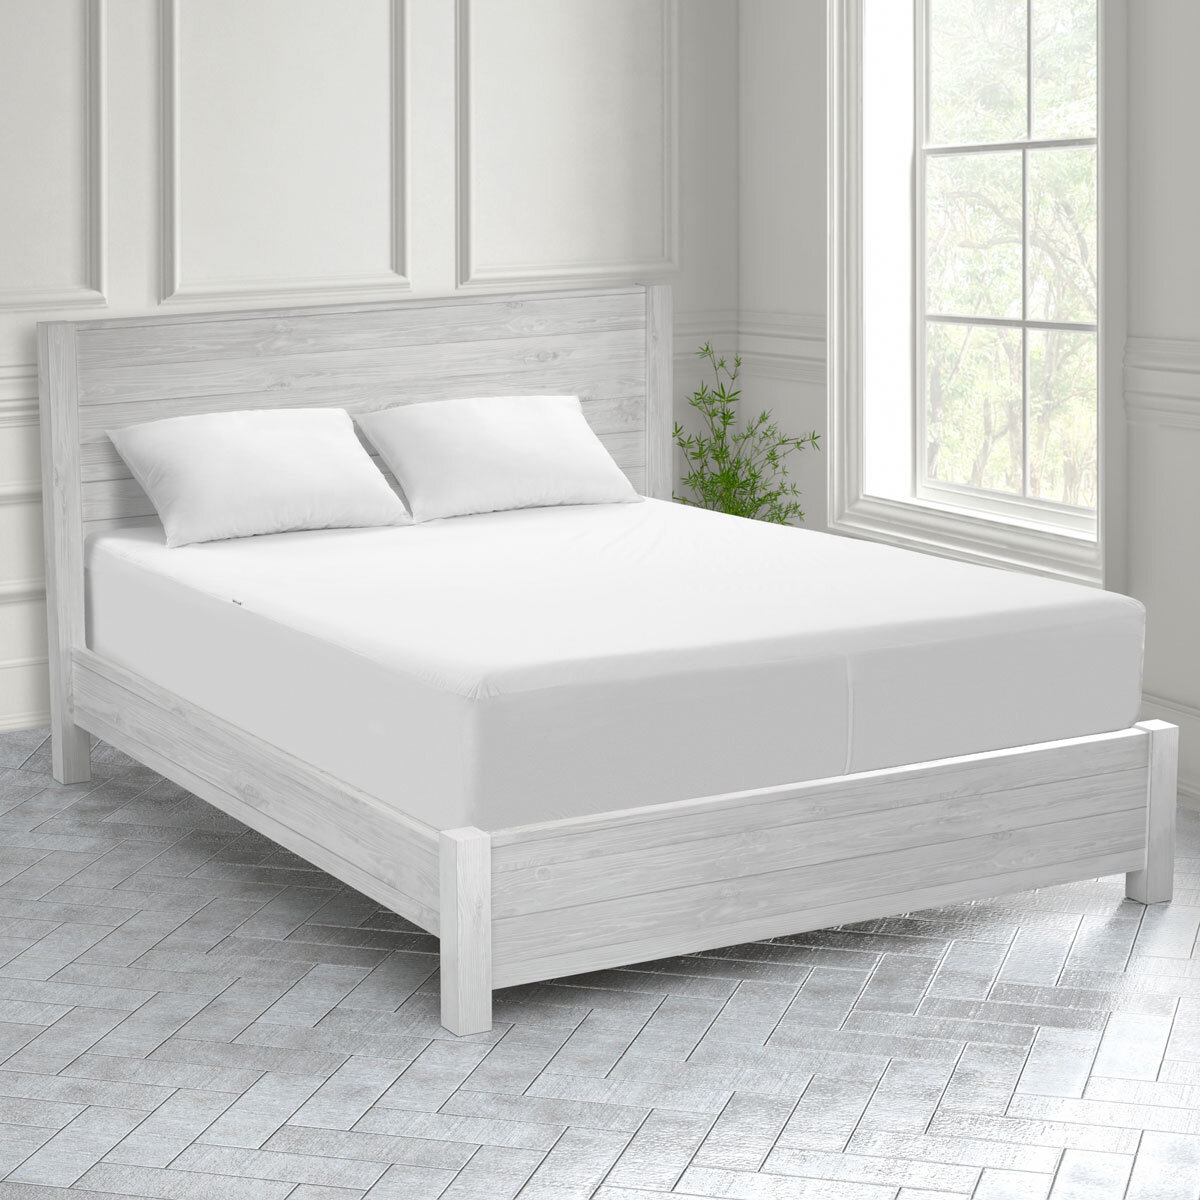 Protect-A-Bed Cotton Mattress Protector in 5 Sizes